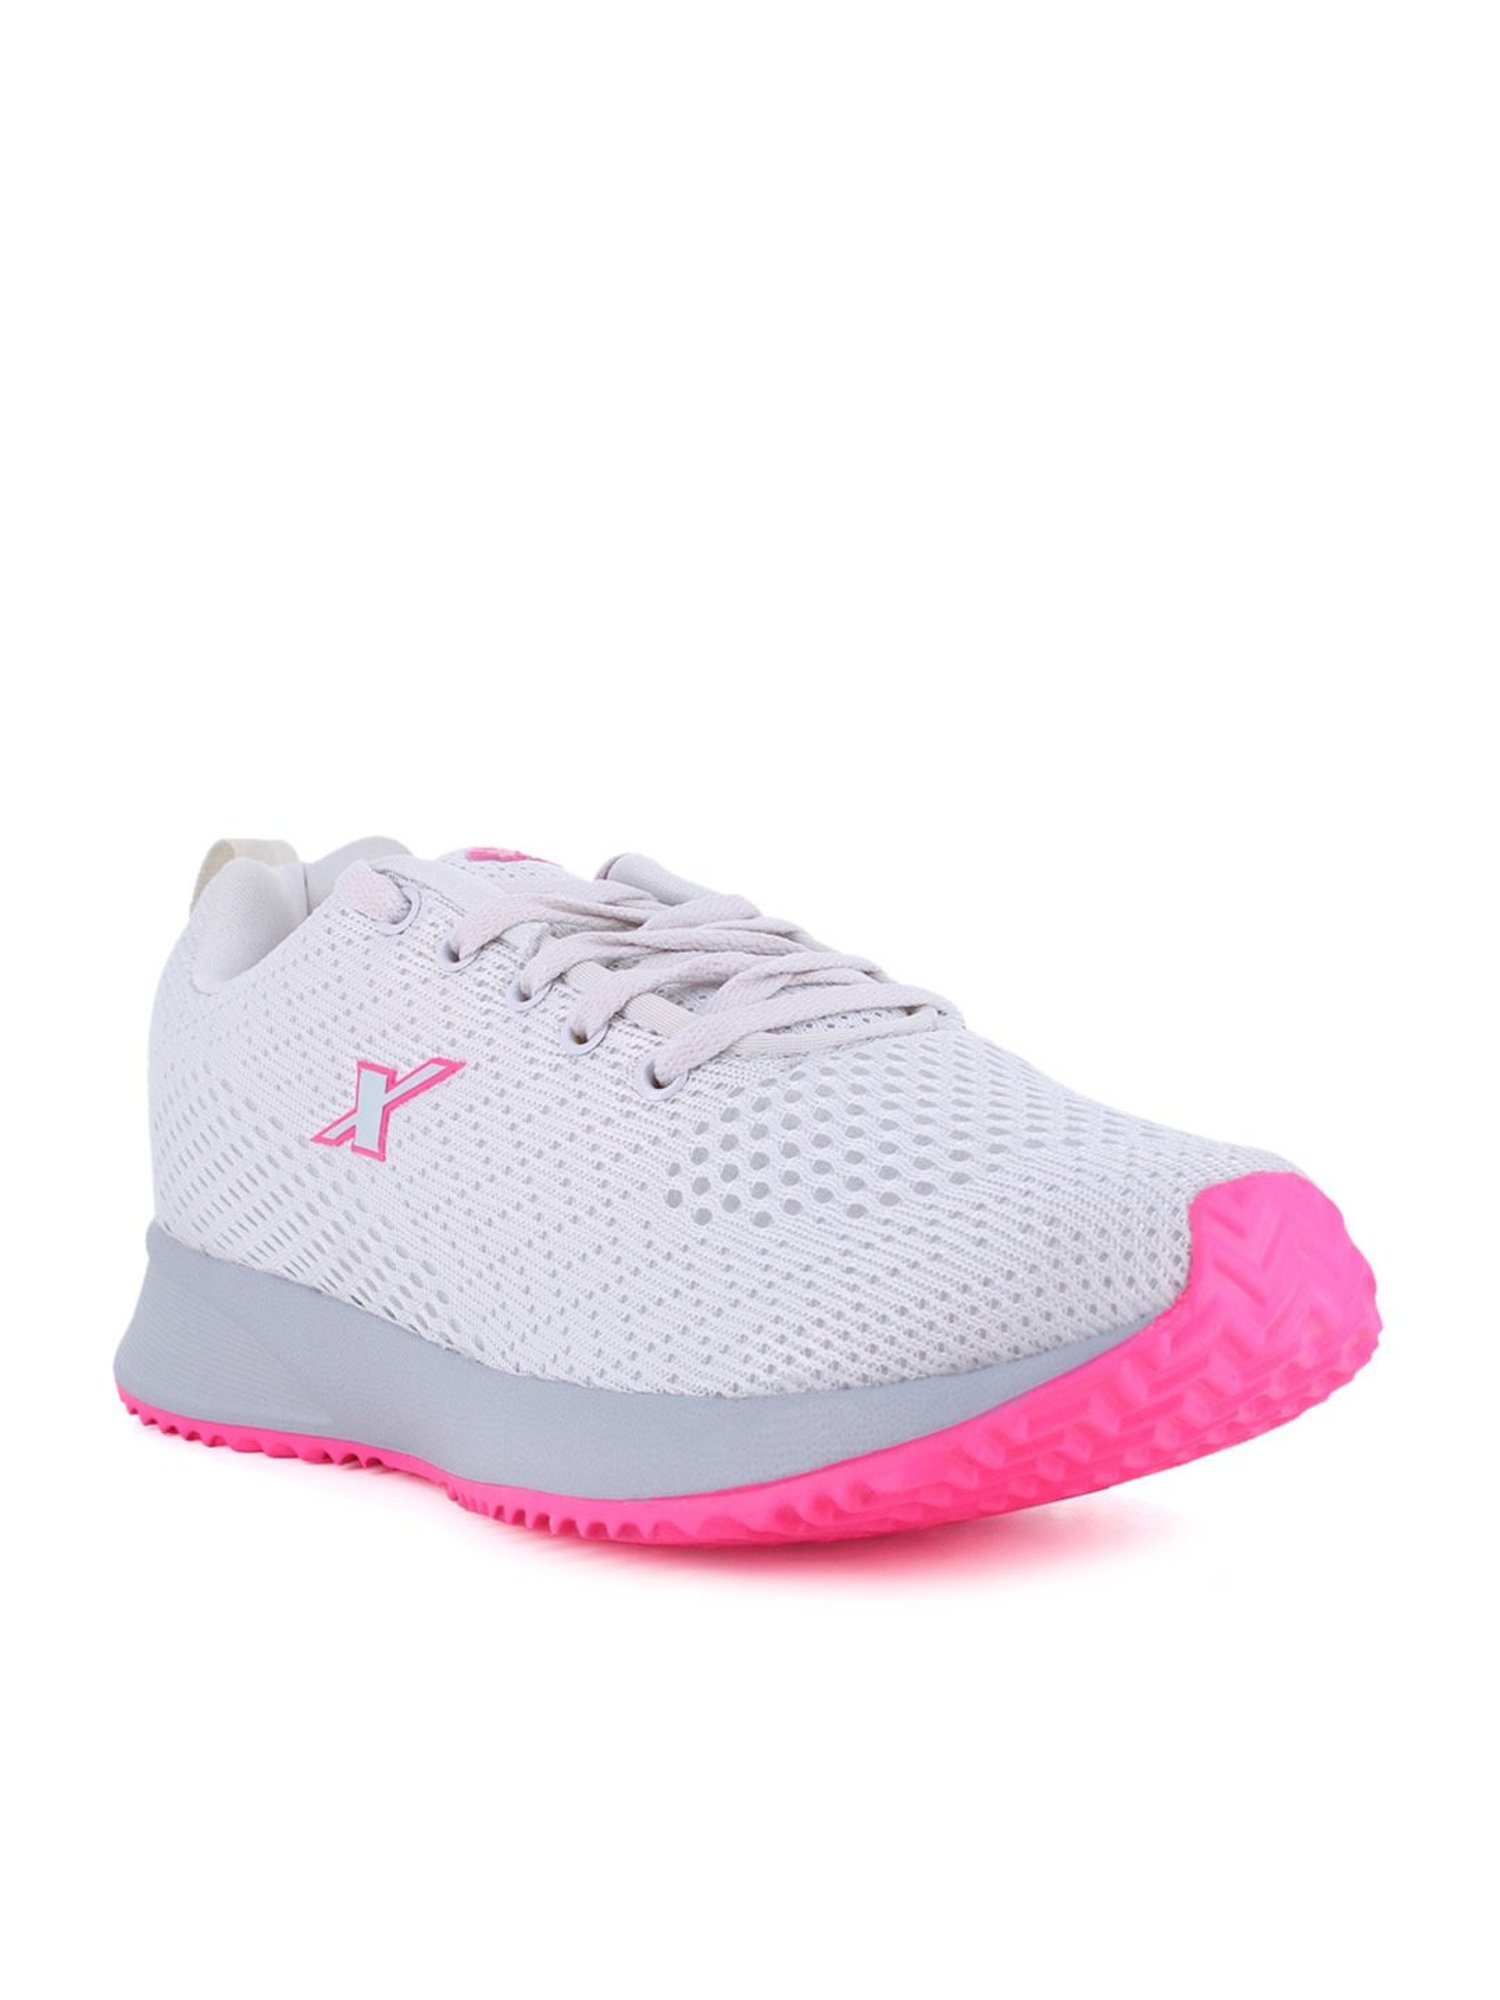 Buy Sparx Women SL-538 Peach Grey Sports Shoes SX0538LPCGY0004 at Amazon.in